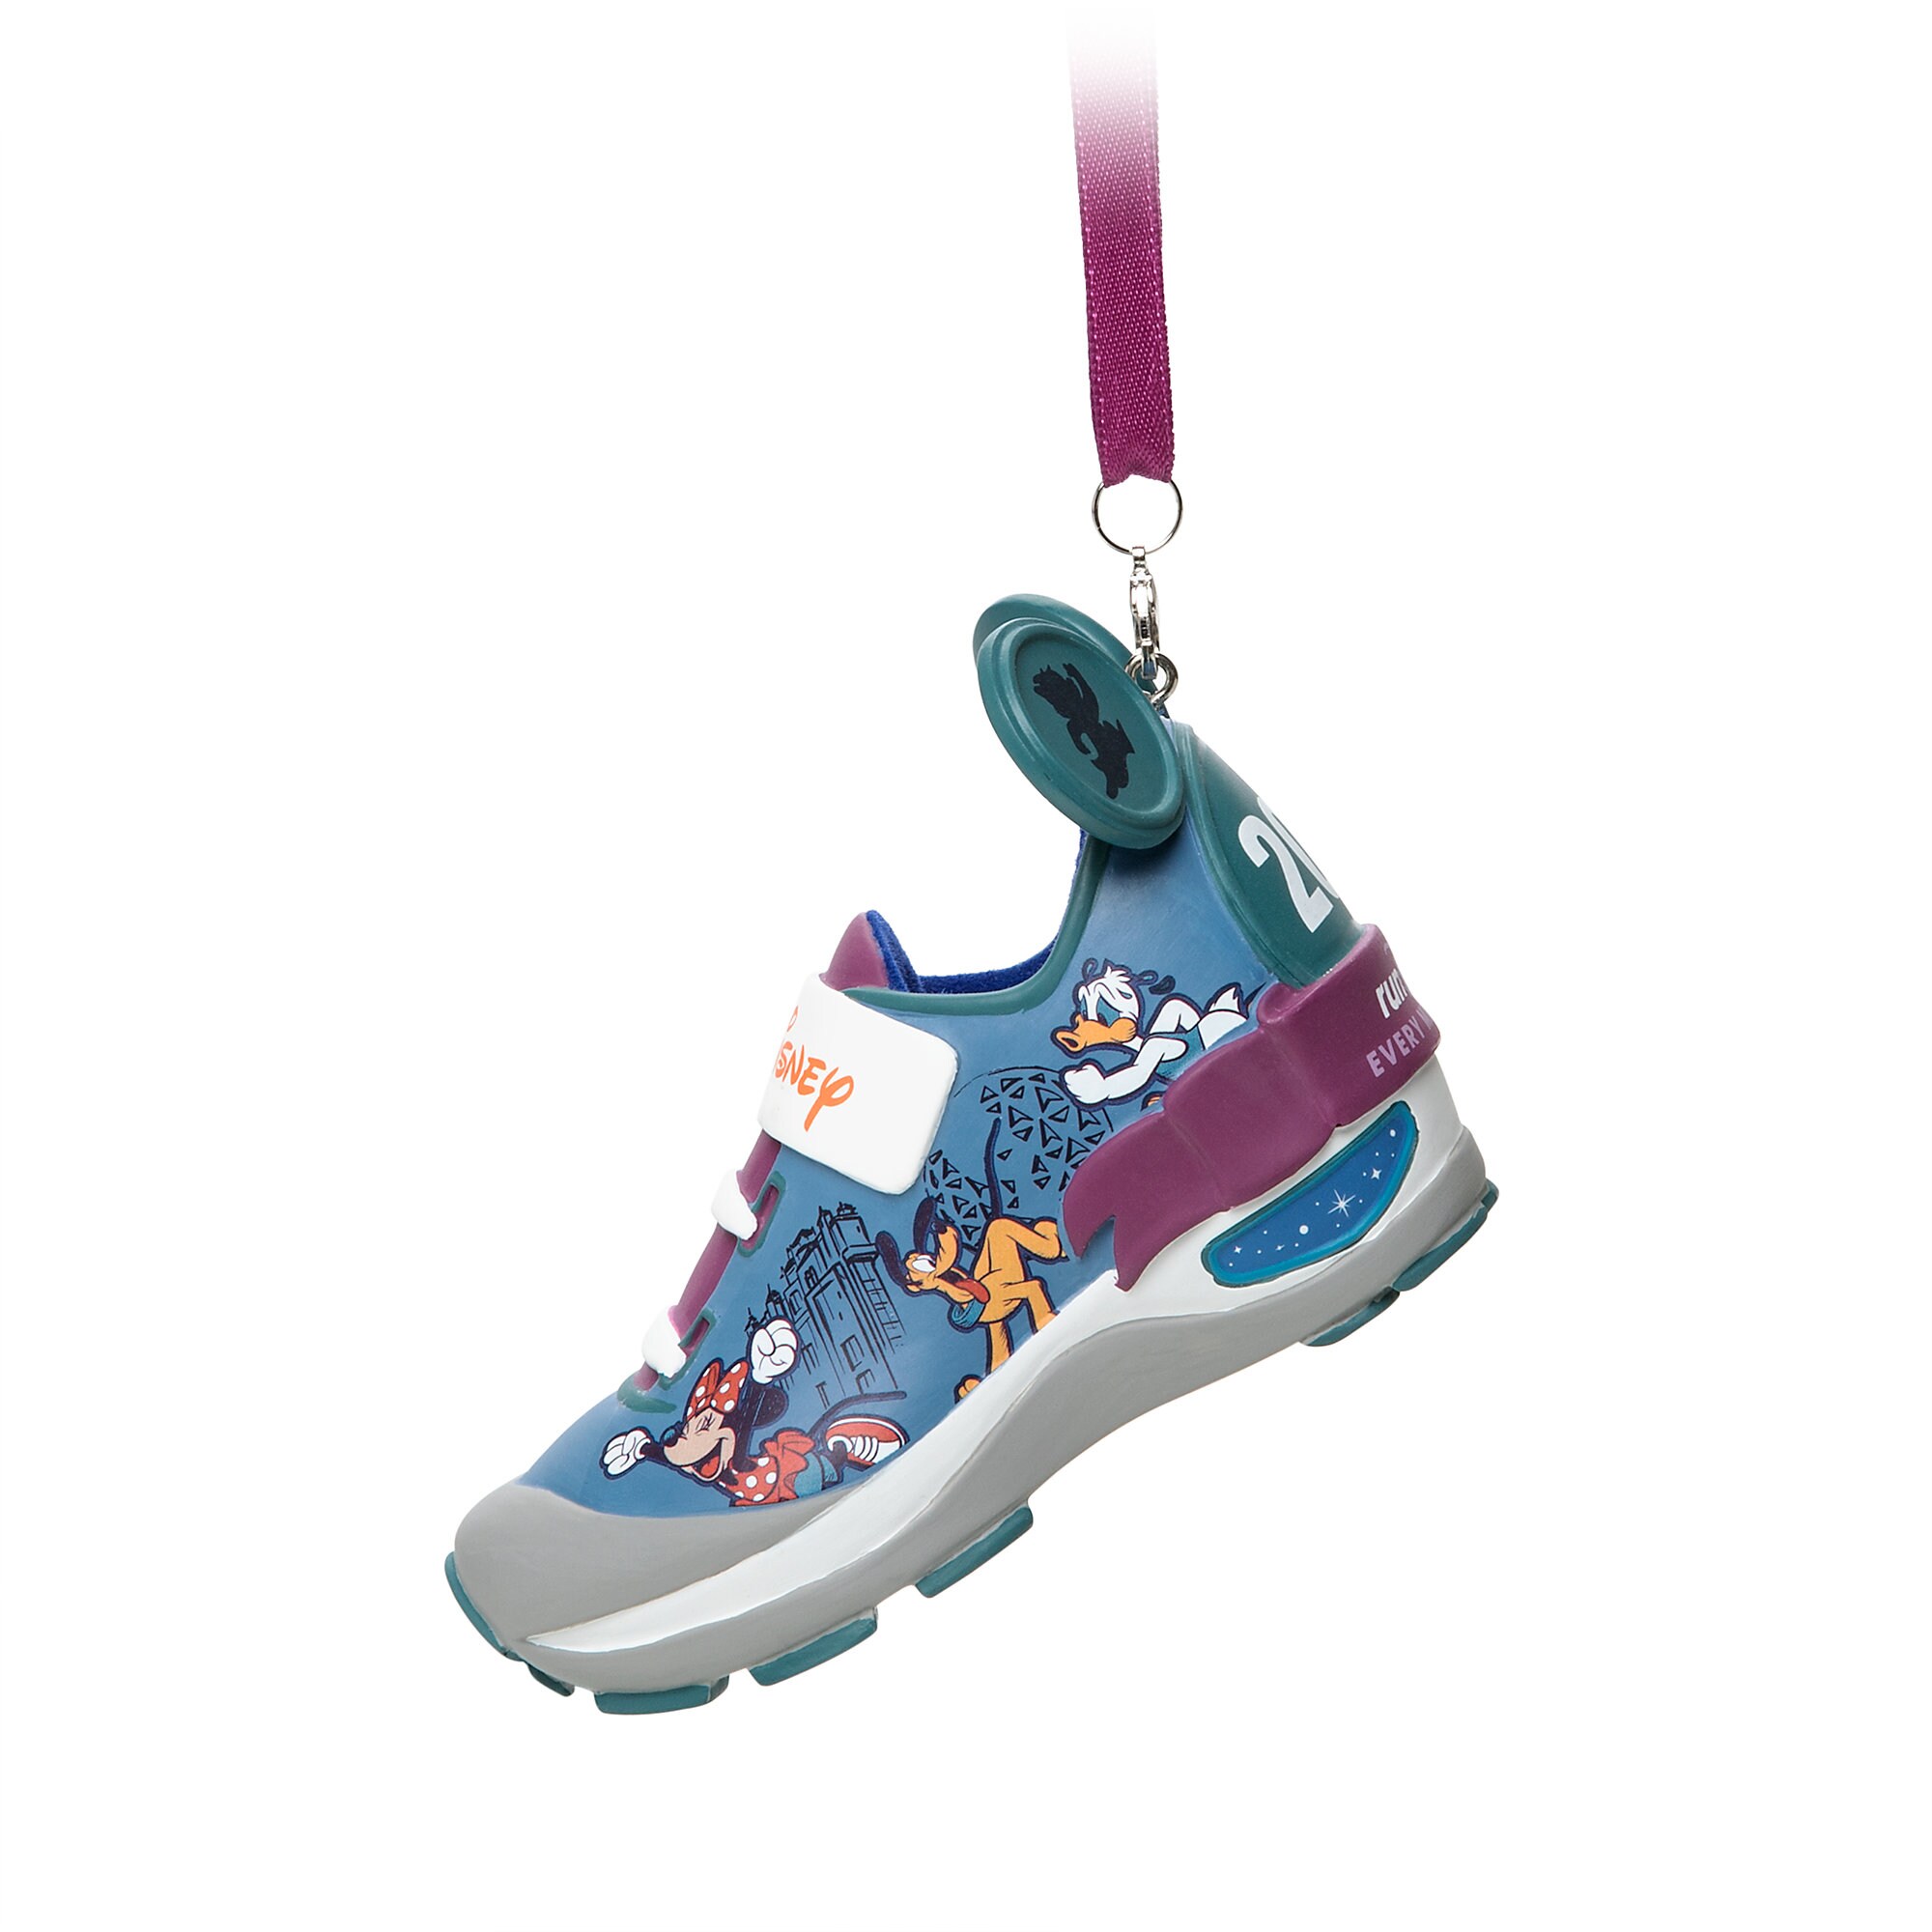 Mickey Mouse and Friends runDisney 2019 Sneaker Ornament